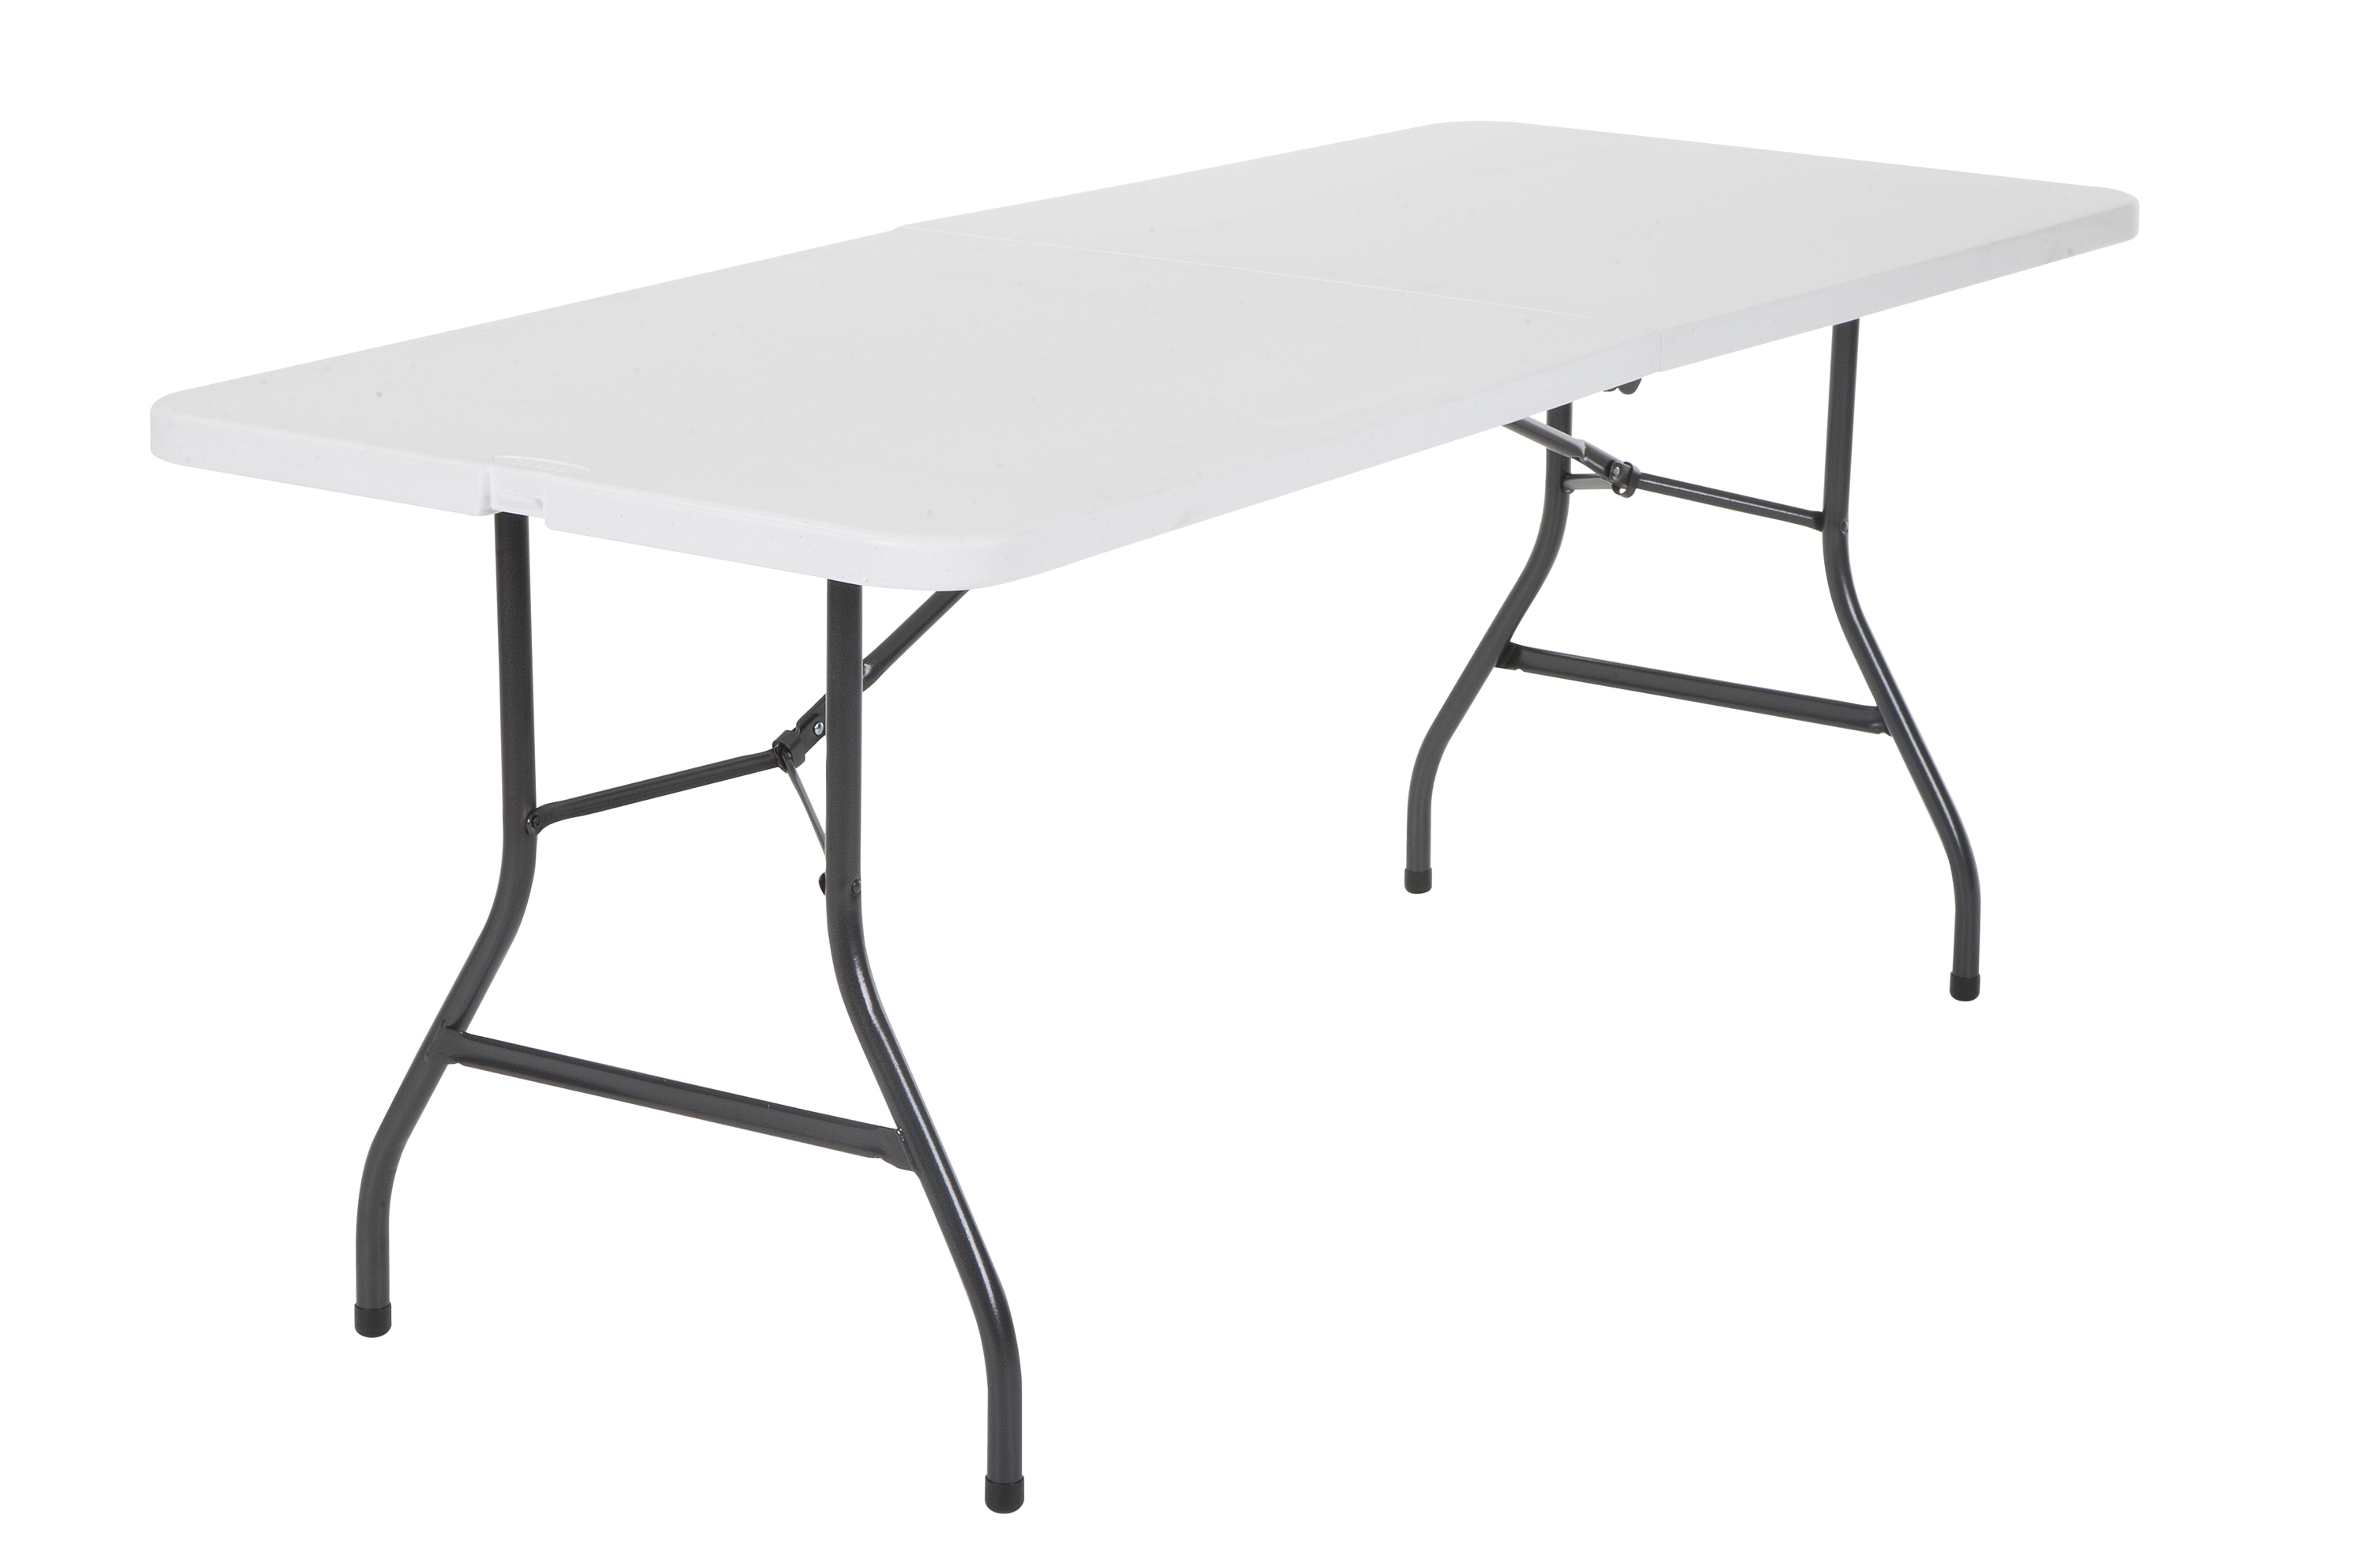 Cosco 6 Foot Premium Folding Table In White Speckle - image 2 of 14